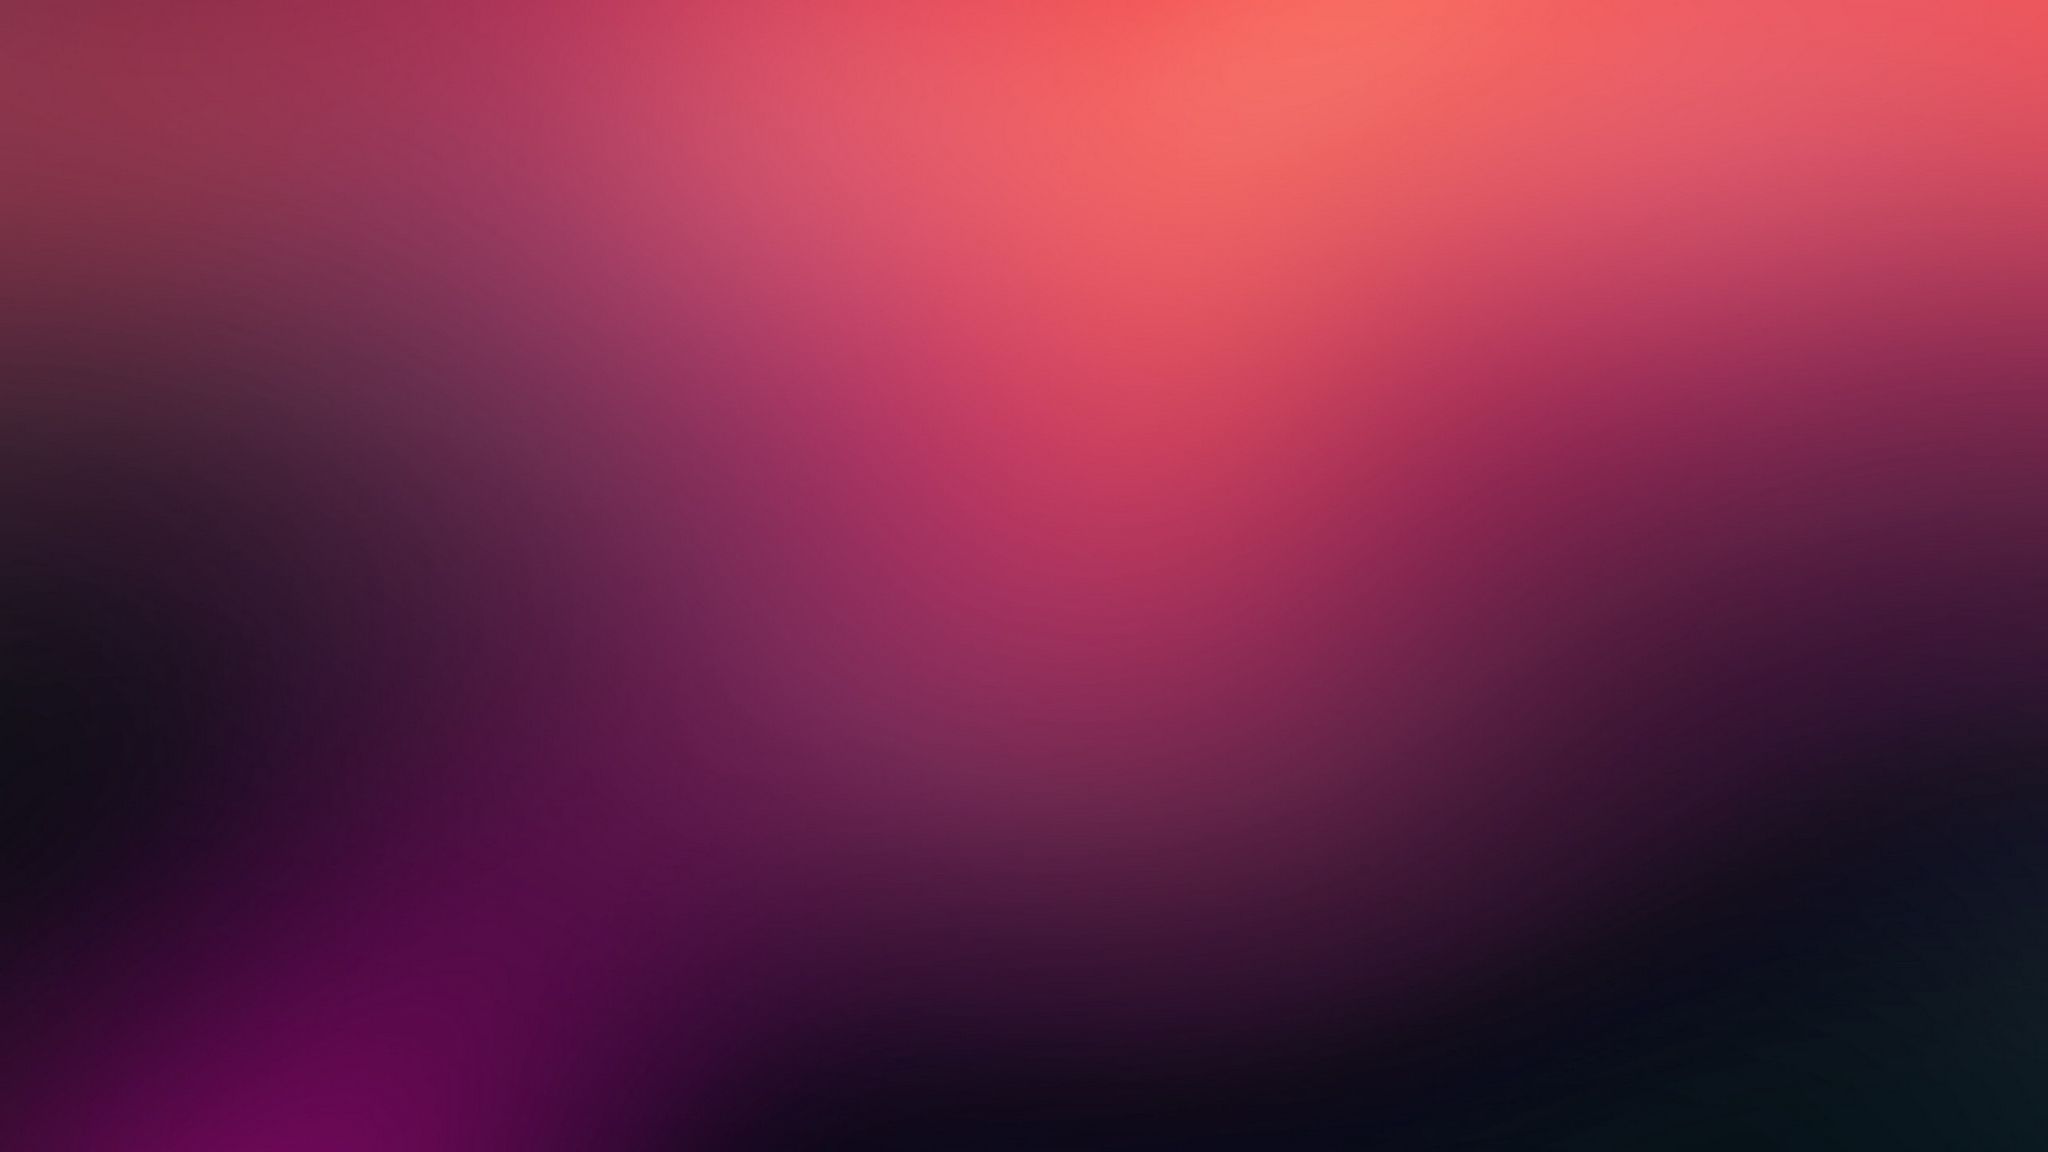 A purple and pink blurry background - 2048x1152